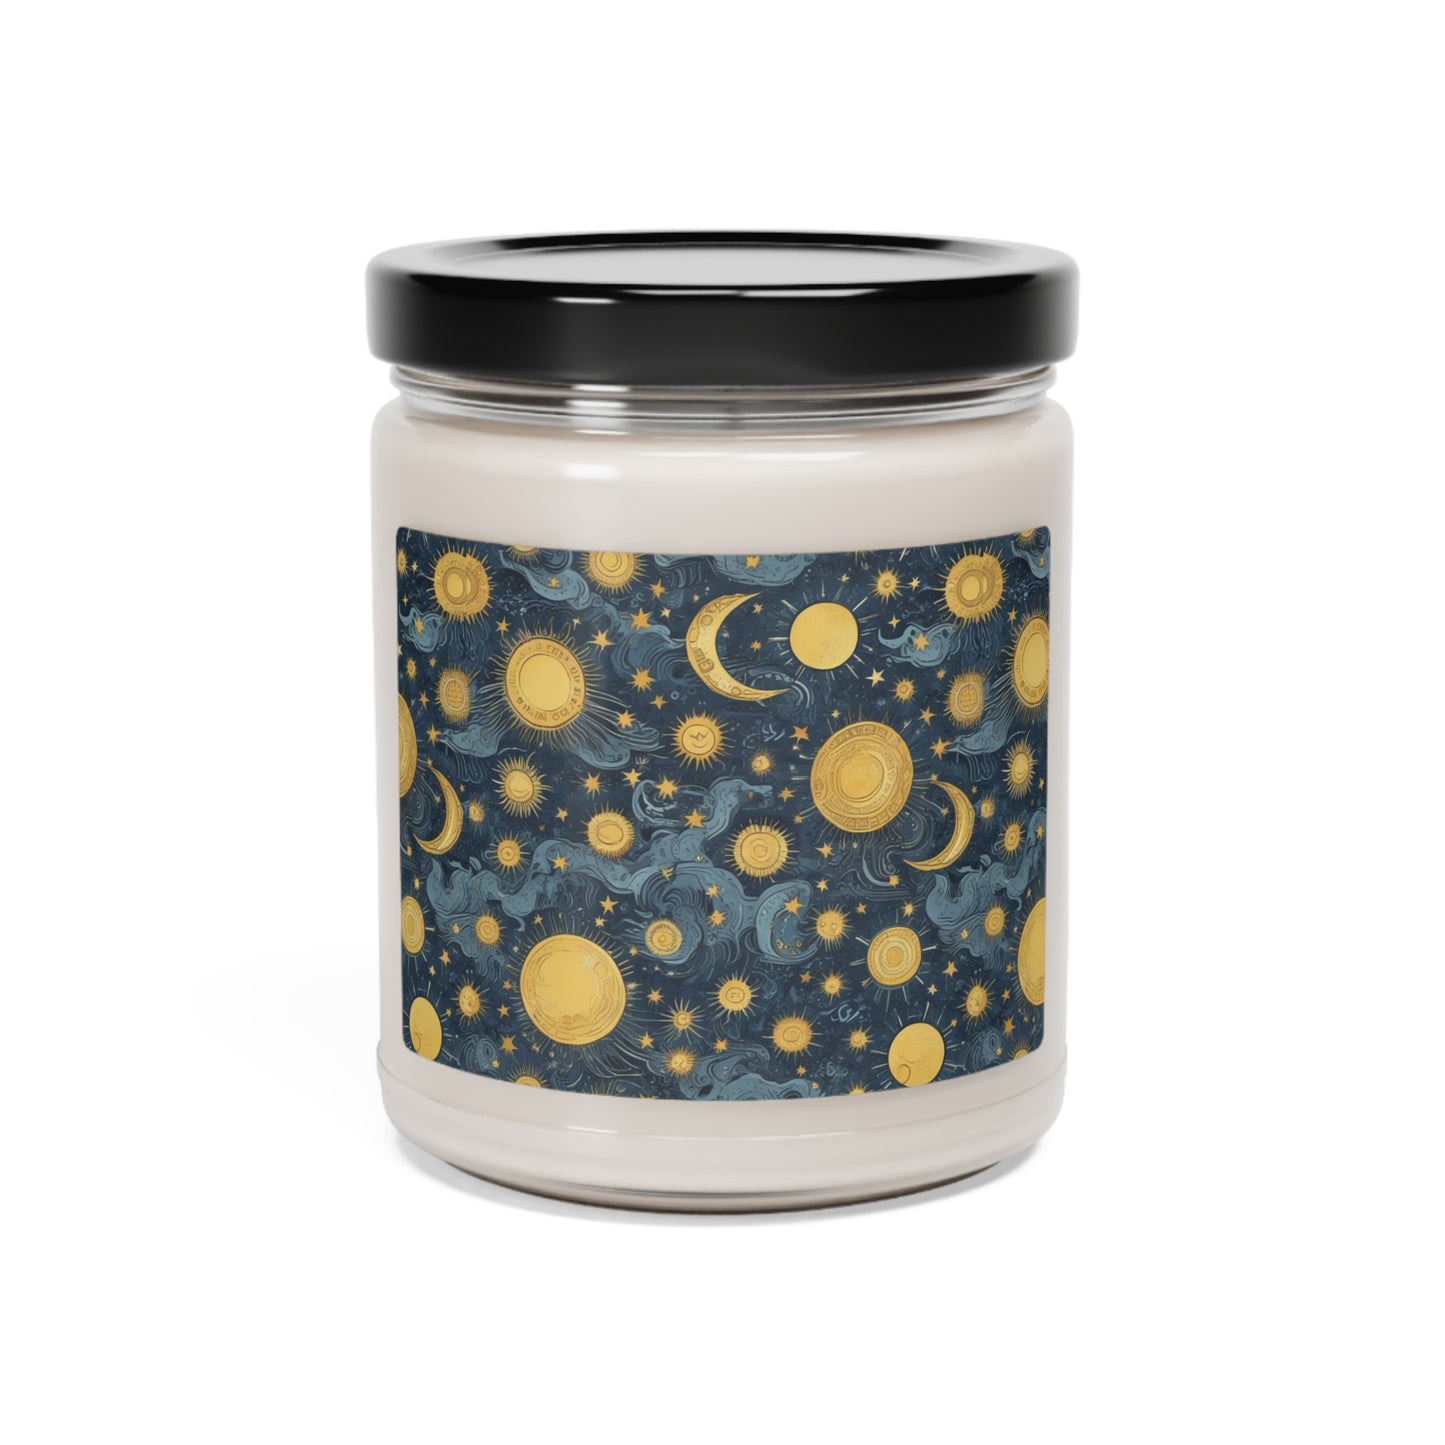 Celestial Print Scented Soy Candle, 9oz